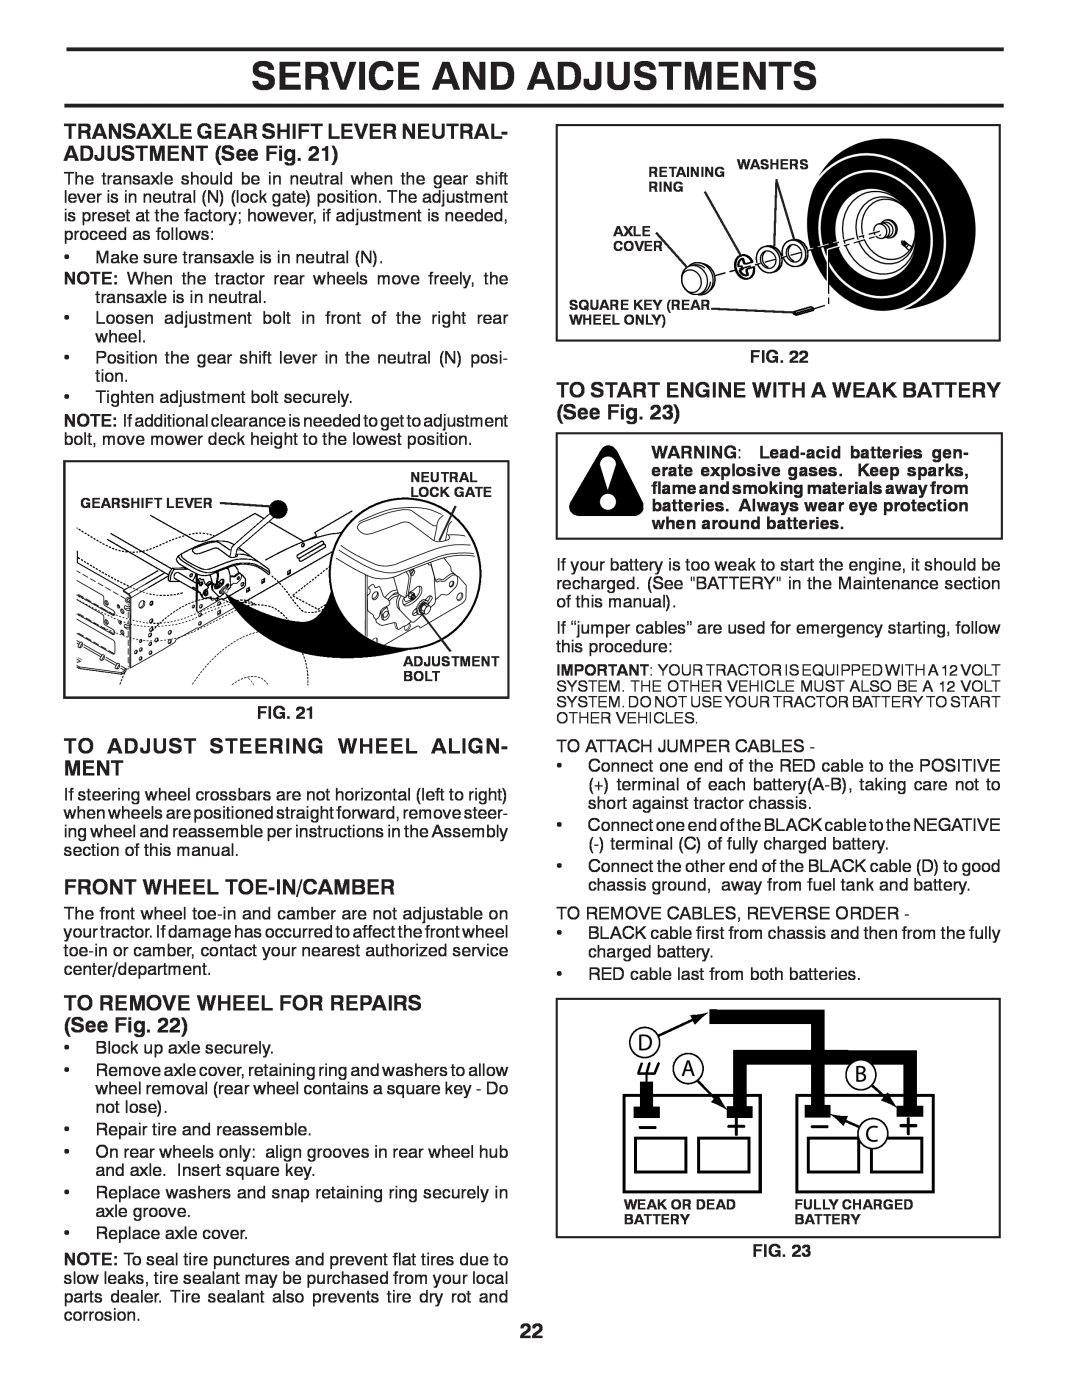 Poulan 96012006802, 414754 manual TO START ENGINE WITH A WEAK BATTERY See Fig, To Adjust Steering Wheel Align- Ment 